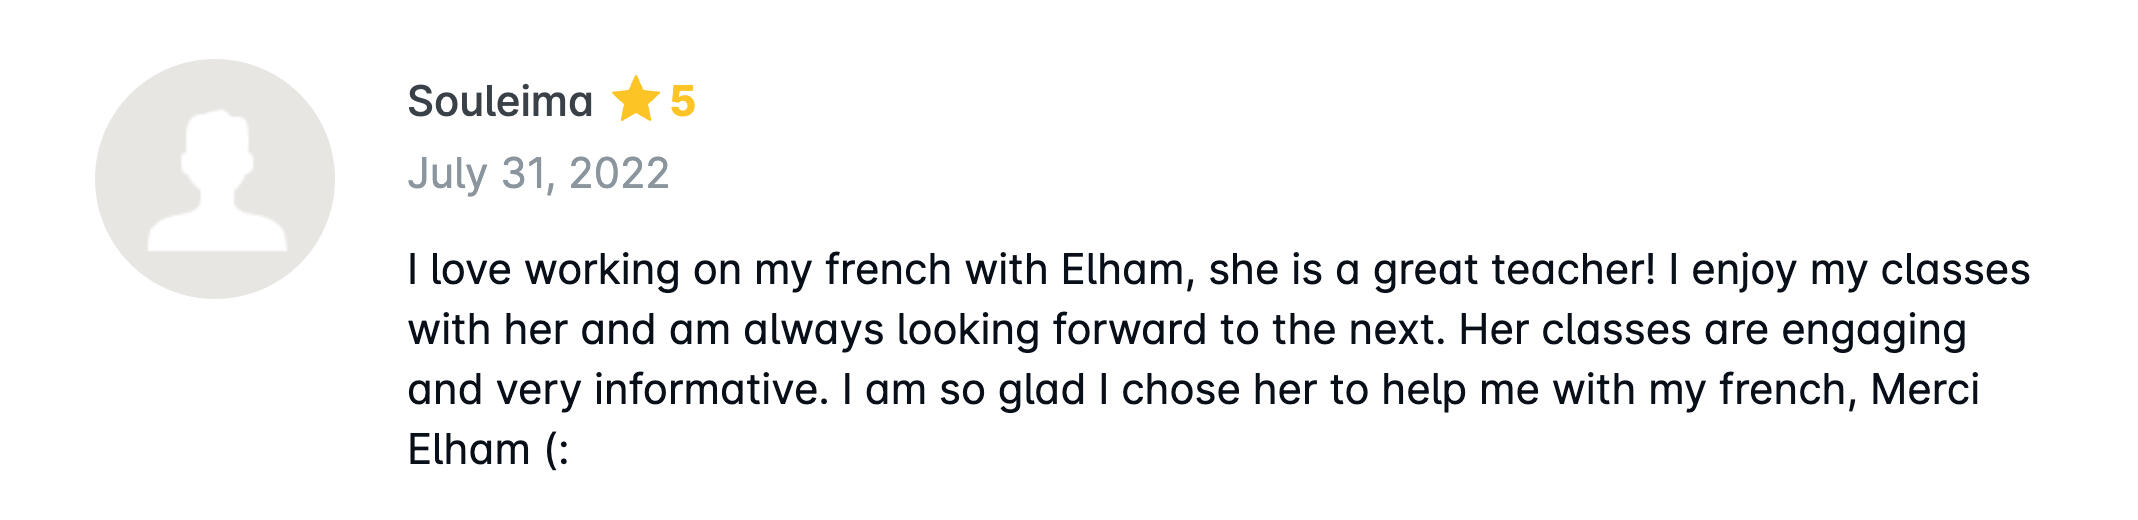 I love working on my french with Elham, she is a great teacher! I enjoy my classes with her and am always looking forward to the next. Her classes are engaging and very informative. I am so glad I chose her to help me with my french, Merci Elham (: